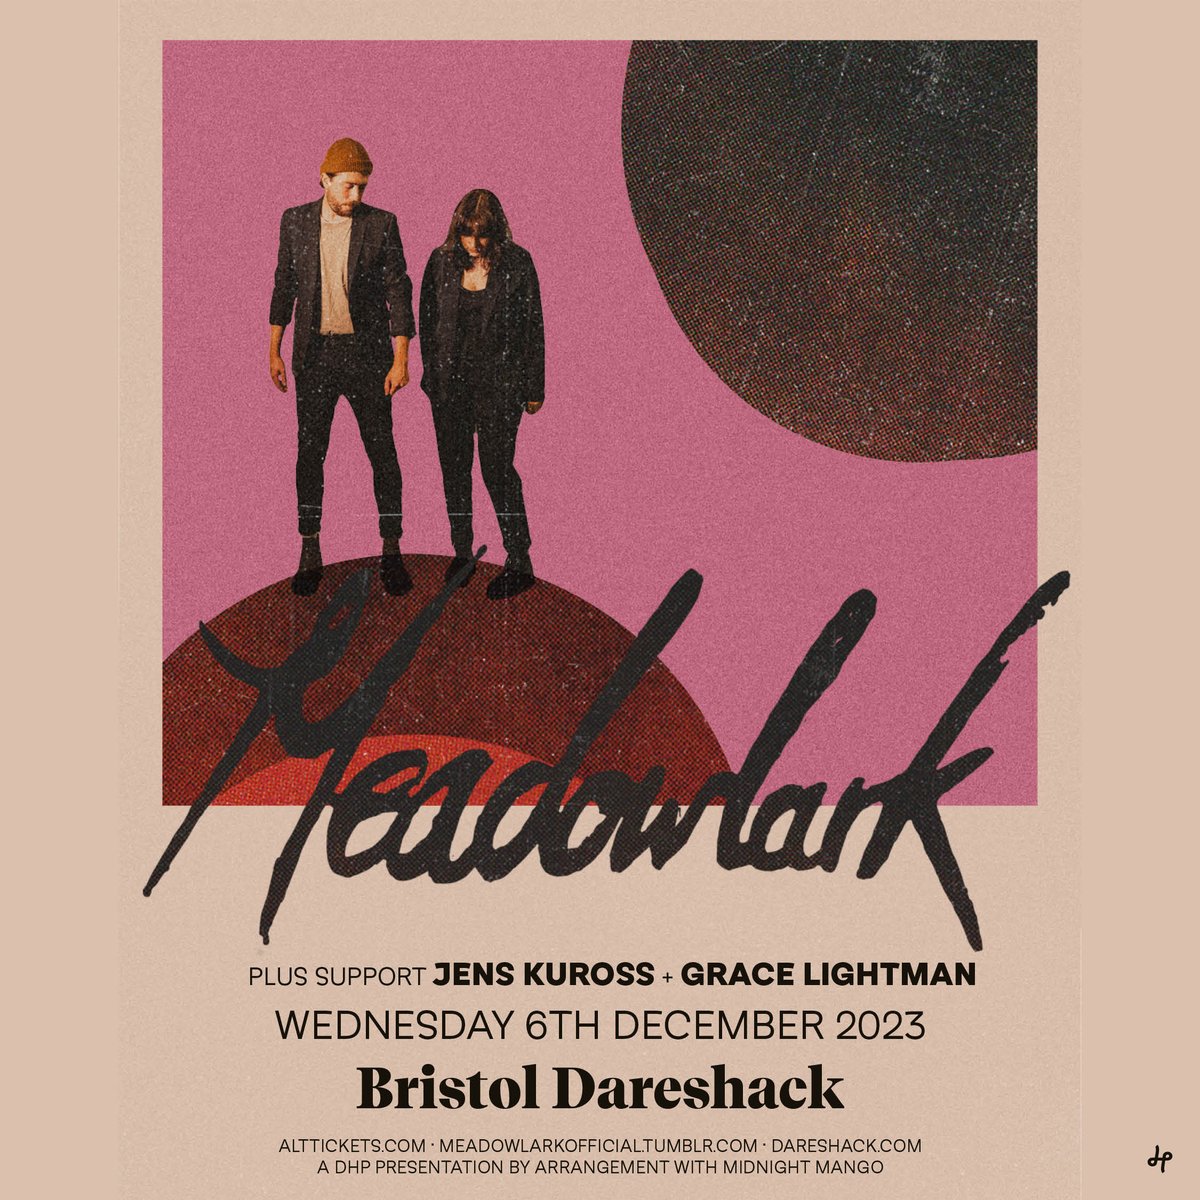 NEW/ With their third album 'Hiraeth' coming in under a month's time, Bristol-based indie folk duo @meadowlarkHQ play a home town show at @dareshack on 6th December! Tickets go on sale this Friday at 10am, set a reminder: bit.ly/3RdKOAG